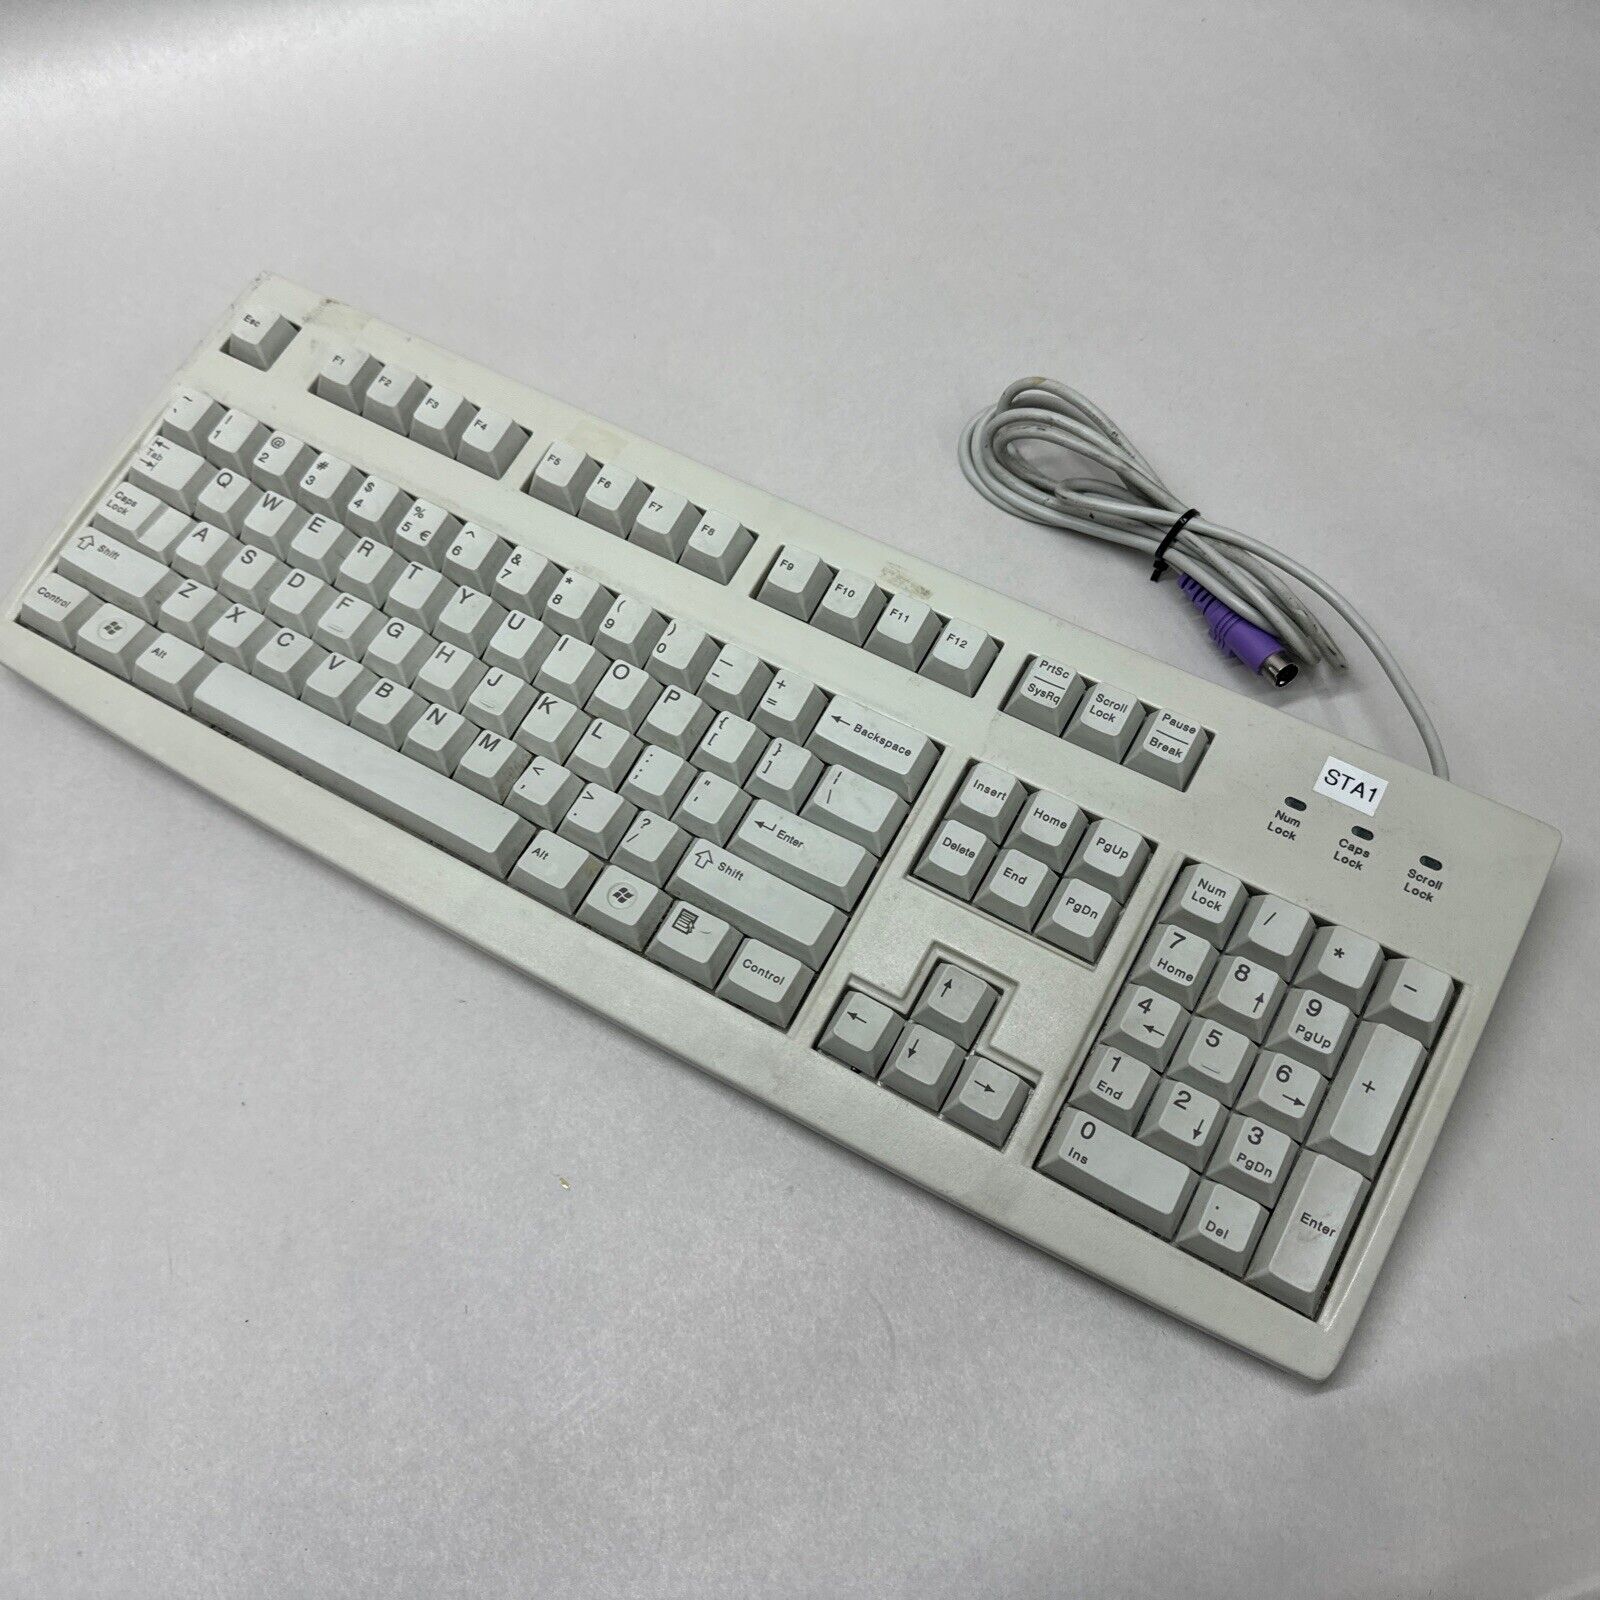 Cherry RS 6000 M PS/2 Keyboard D 91275 Auerbach Opf. Made in Germany Very Clean